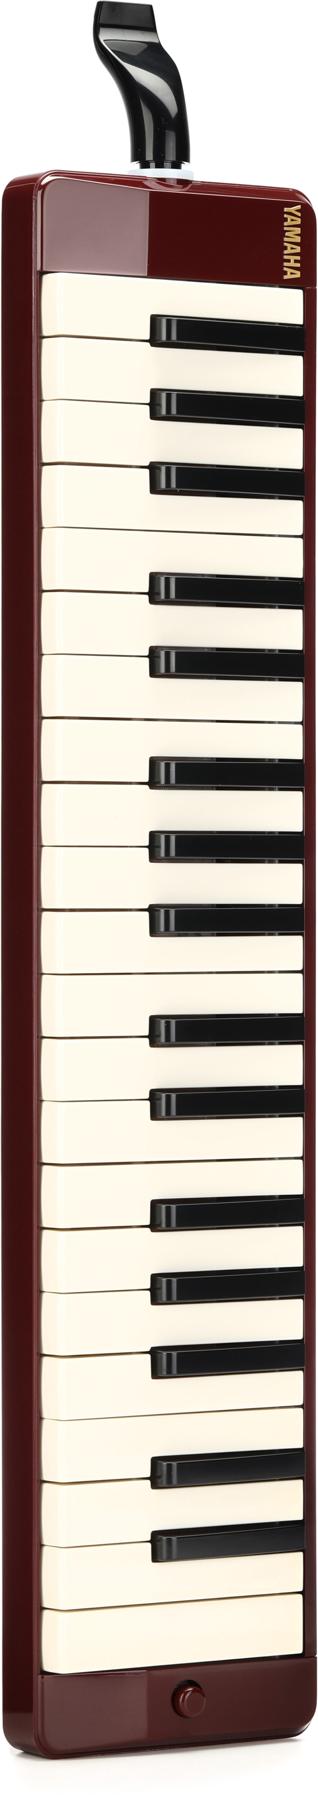 4. Yamaha Pianica, 37-note Melodica (P37D)